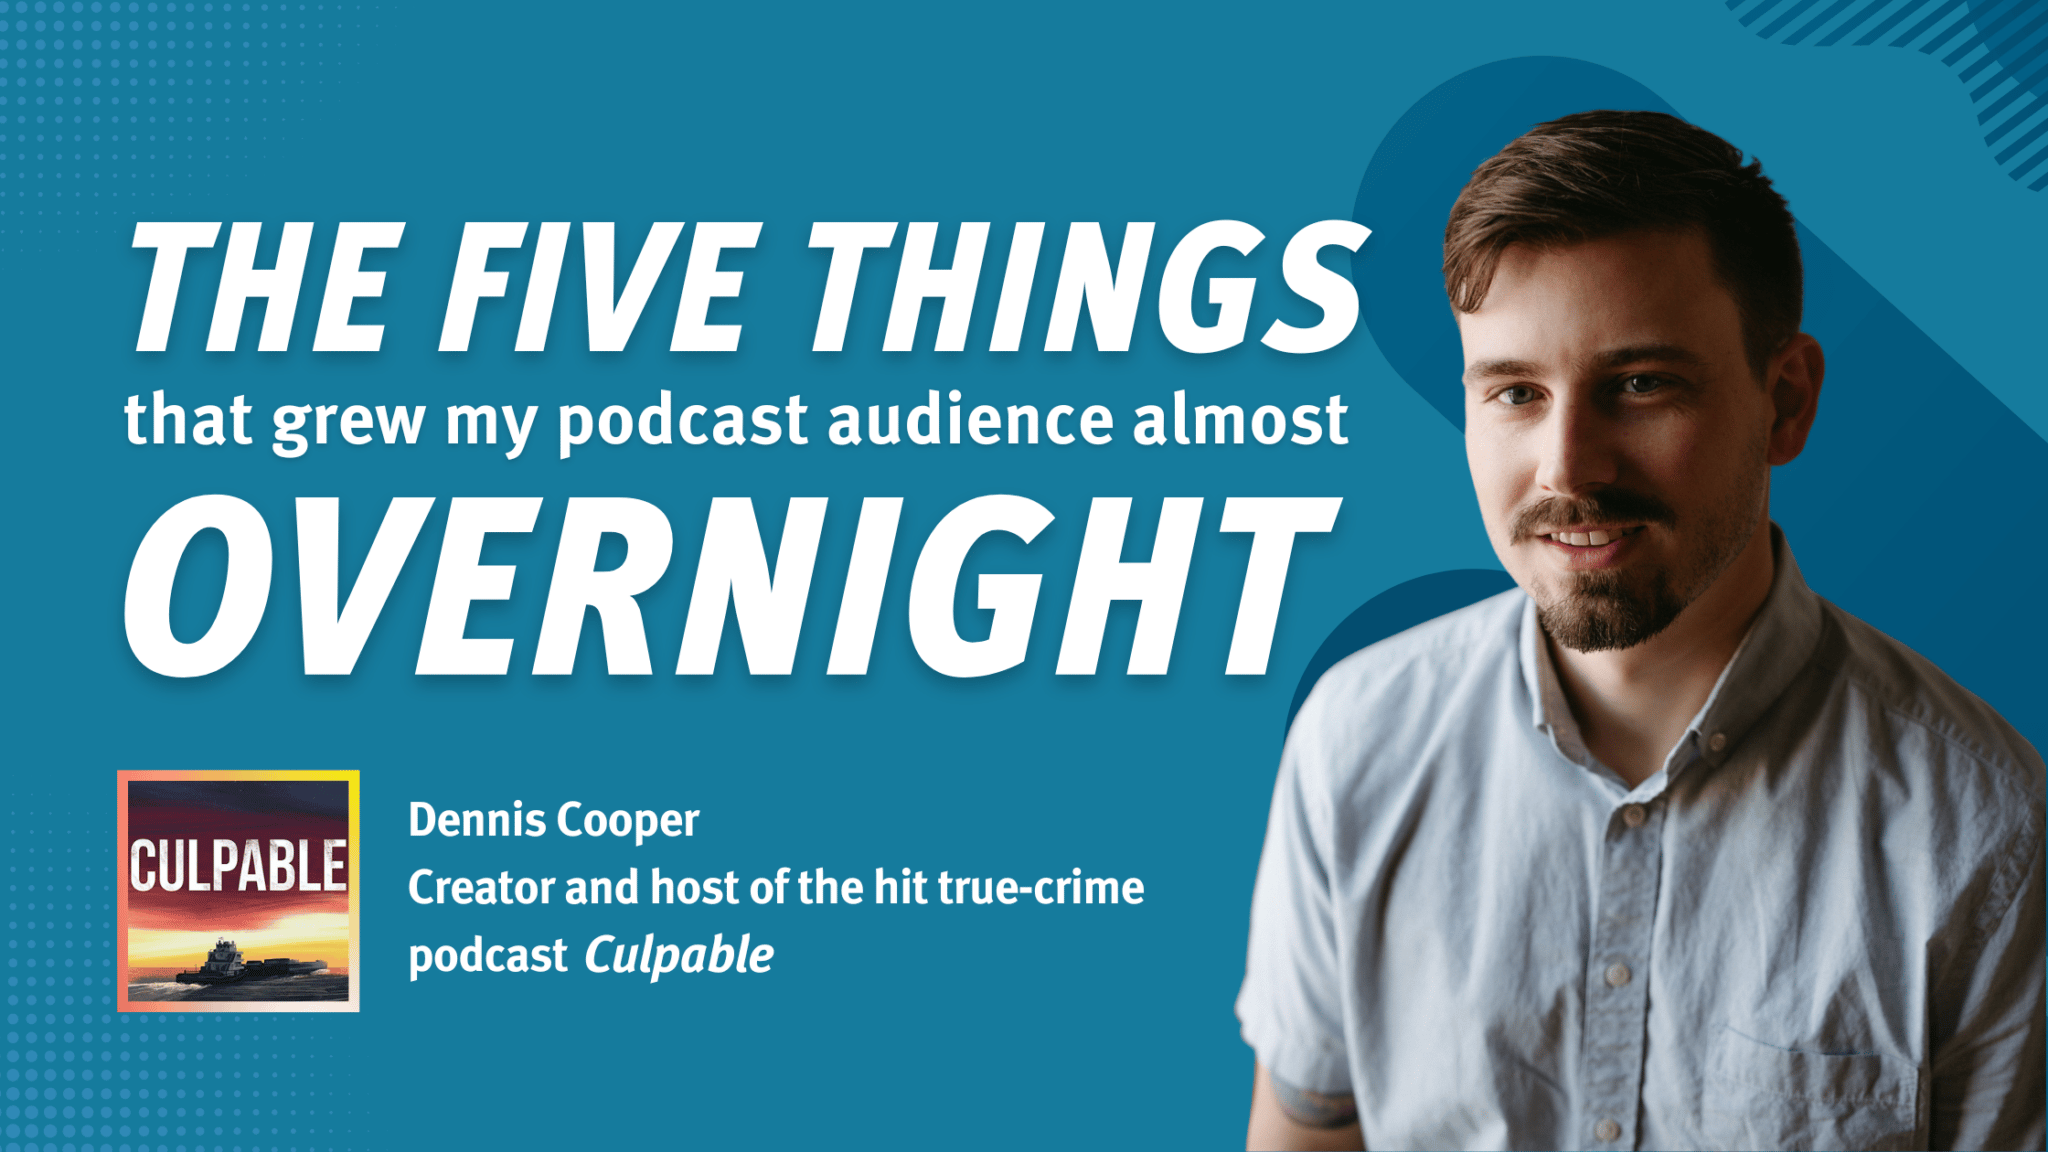 "The Five things that grew my podcast overnight" podcast host Dennis talks on his success with Culpable Podcast Show